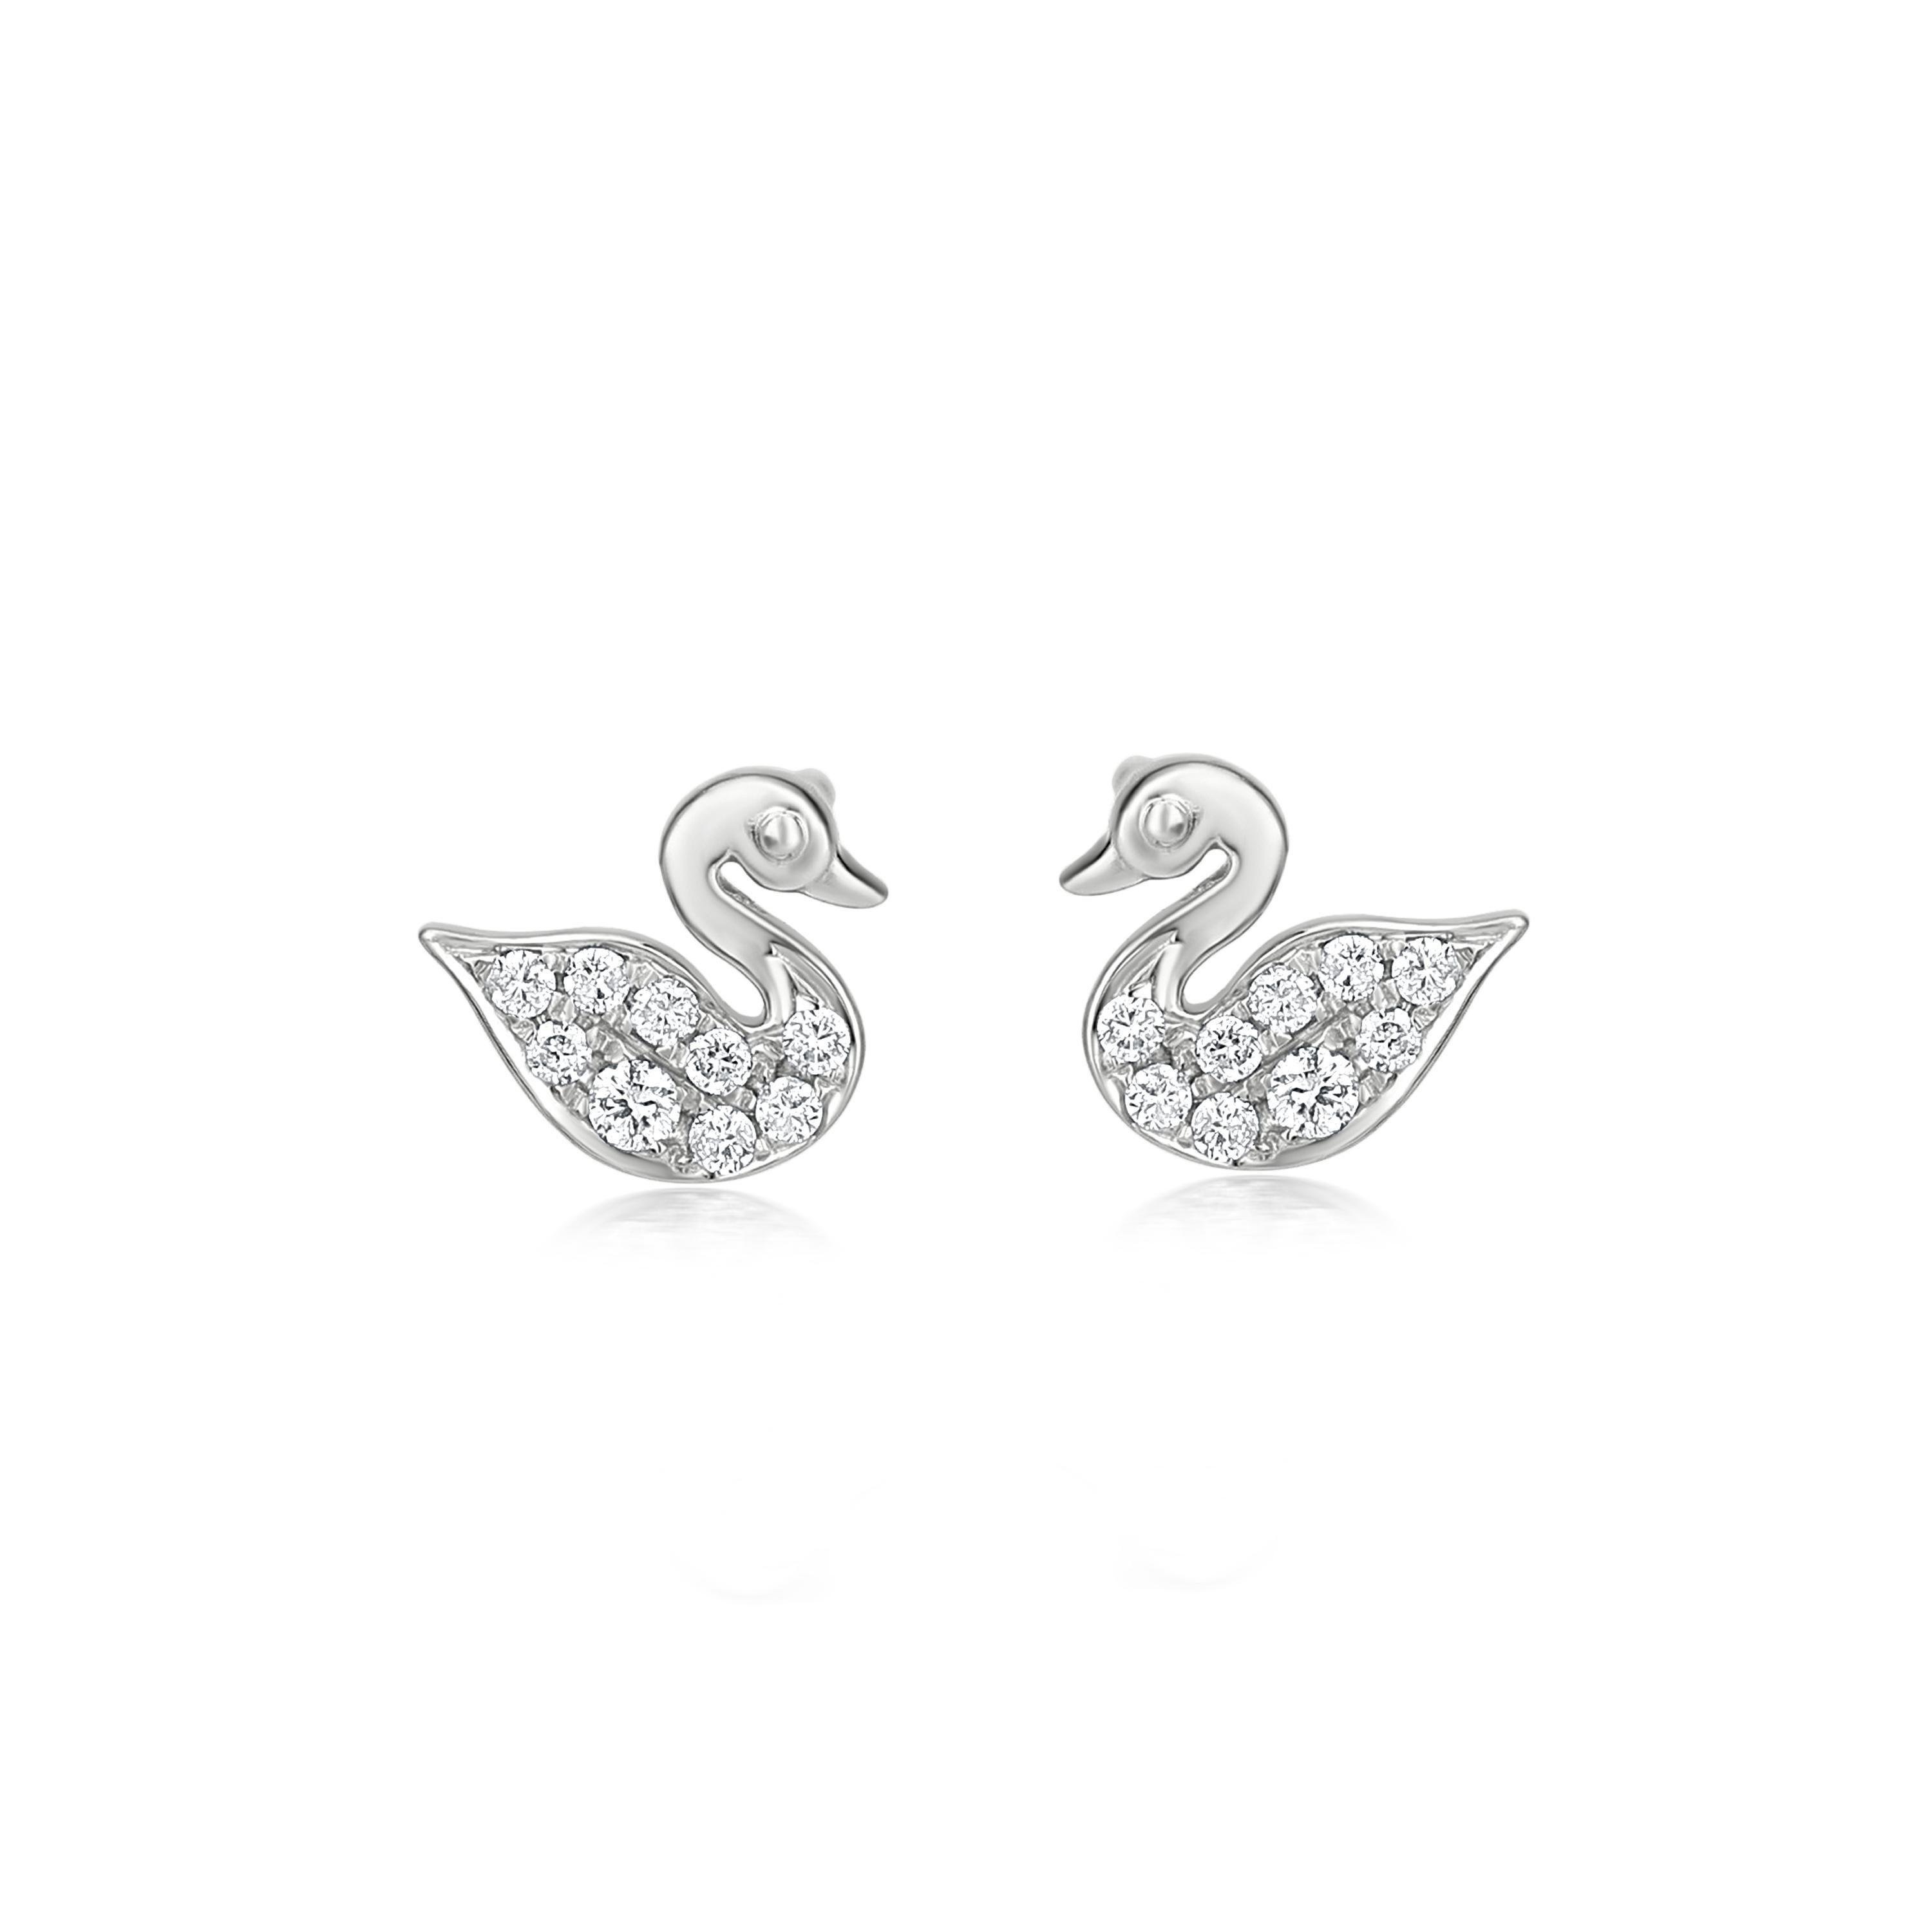 Subtle yet pretty this Luxle swan stud earrings is the new fashion statement. These stud earrings are featured with 18 round cut diamonds, totaling 0.13Cts embellished in swan motifs of 18K white gold. These stud earrings come with gold posts and